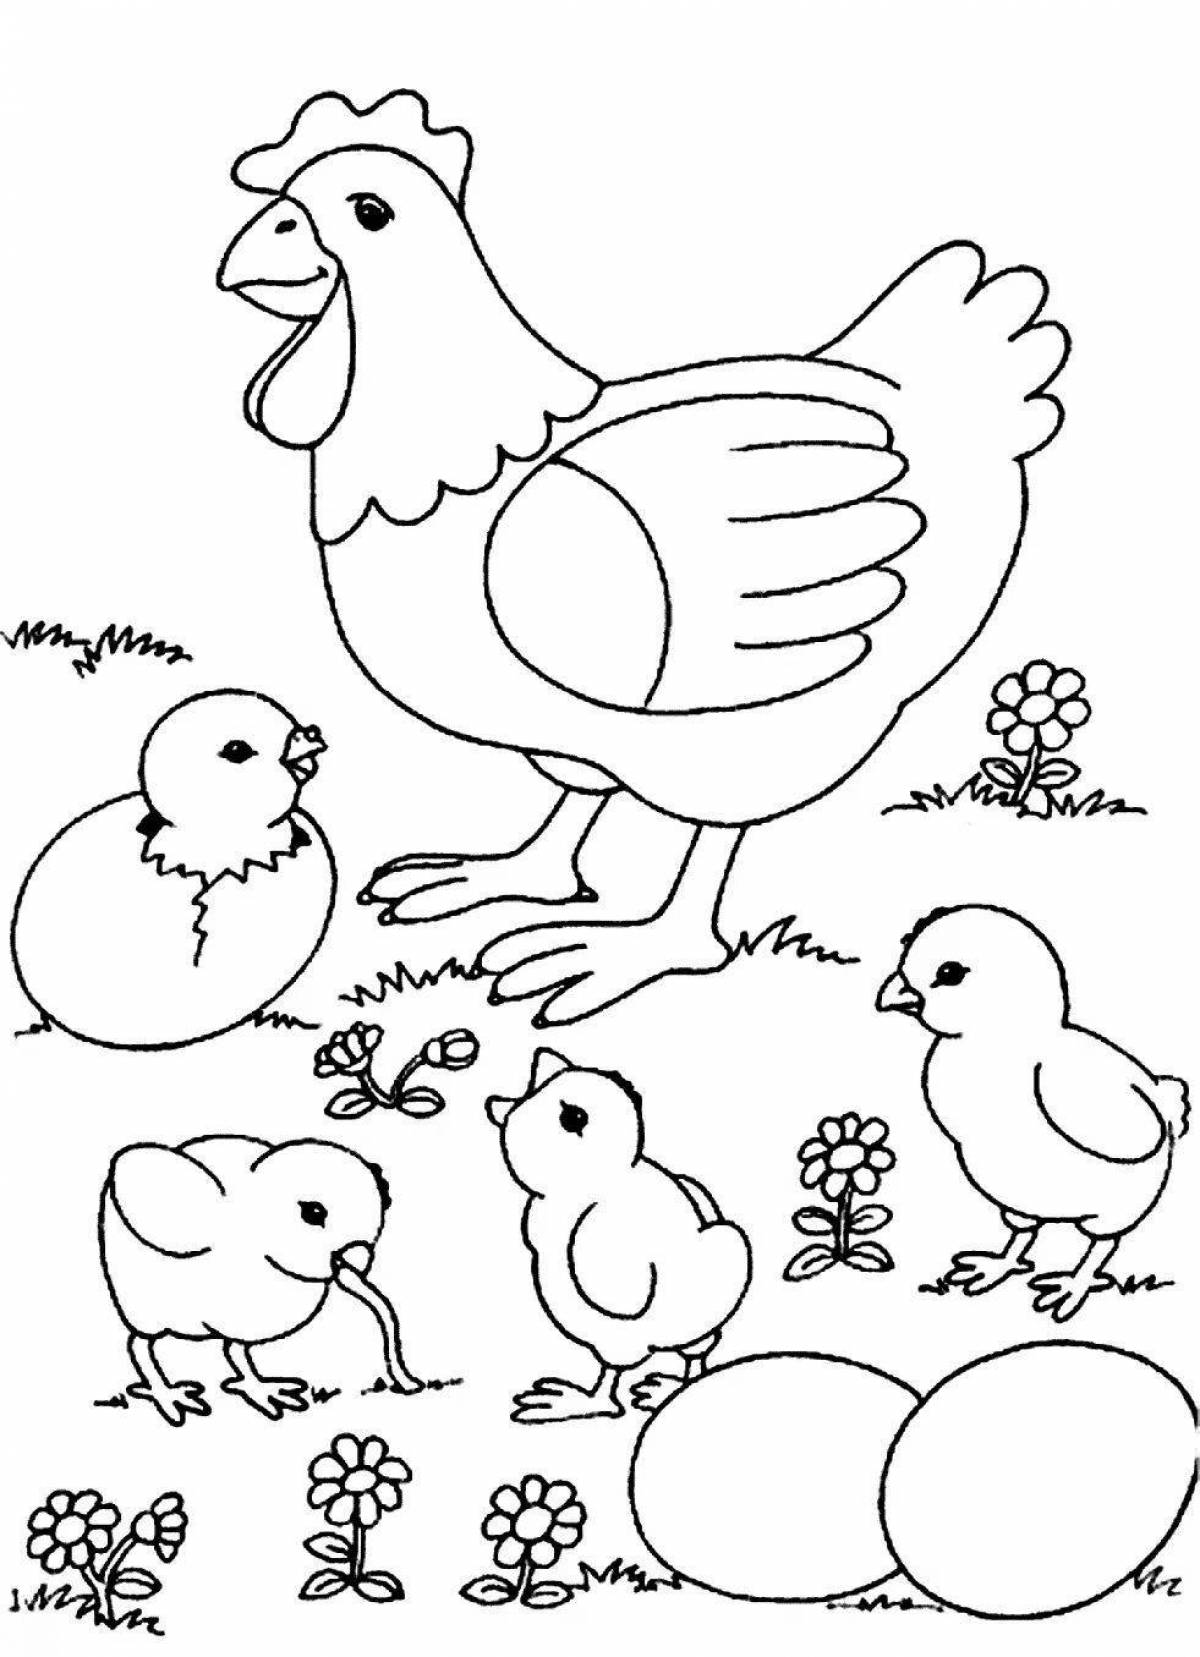 Fun bird coloring page for 6-7 year olds